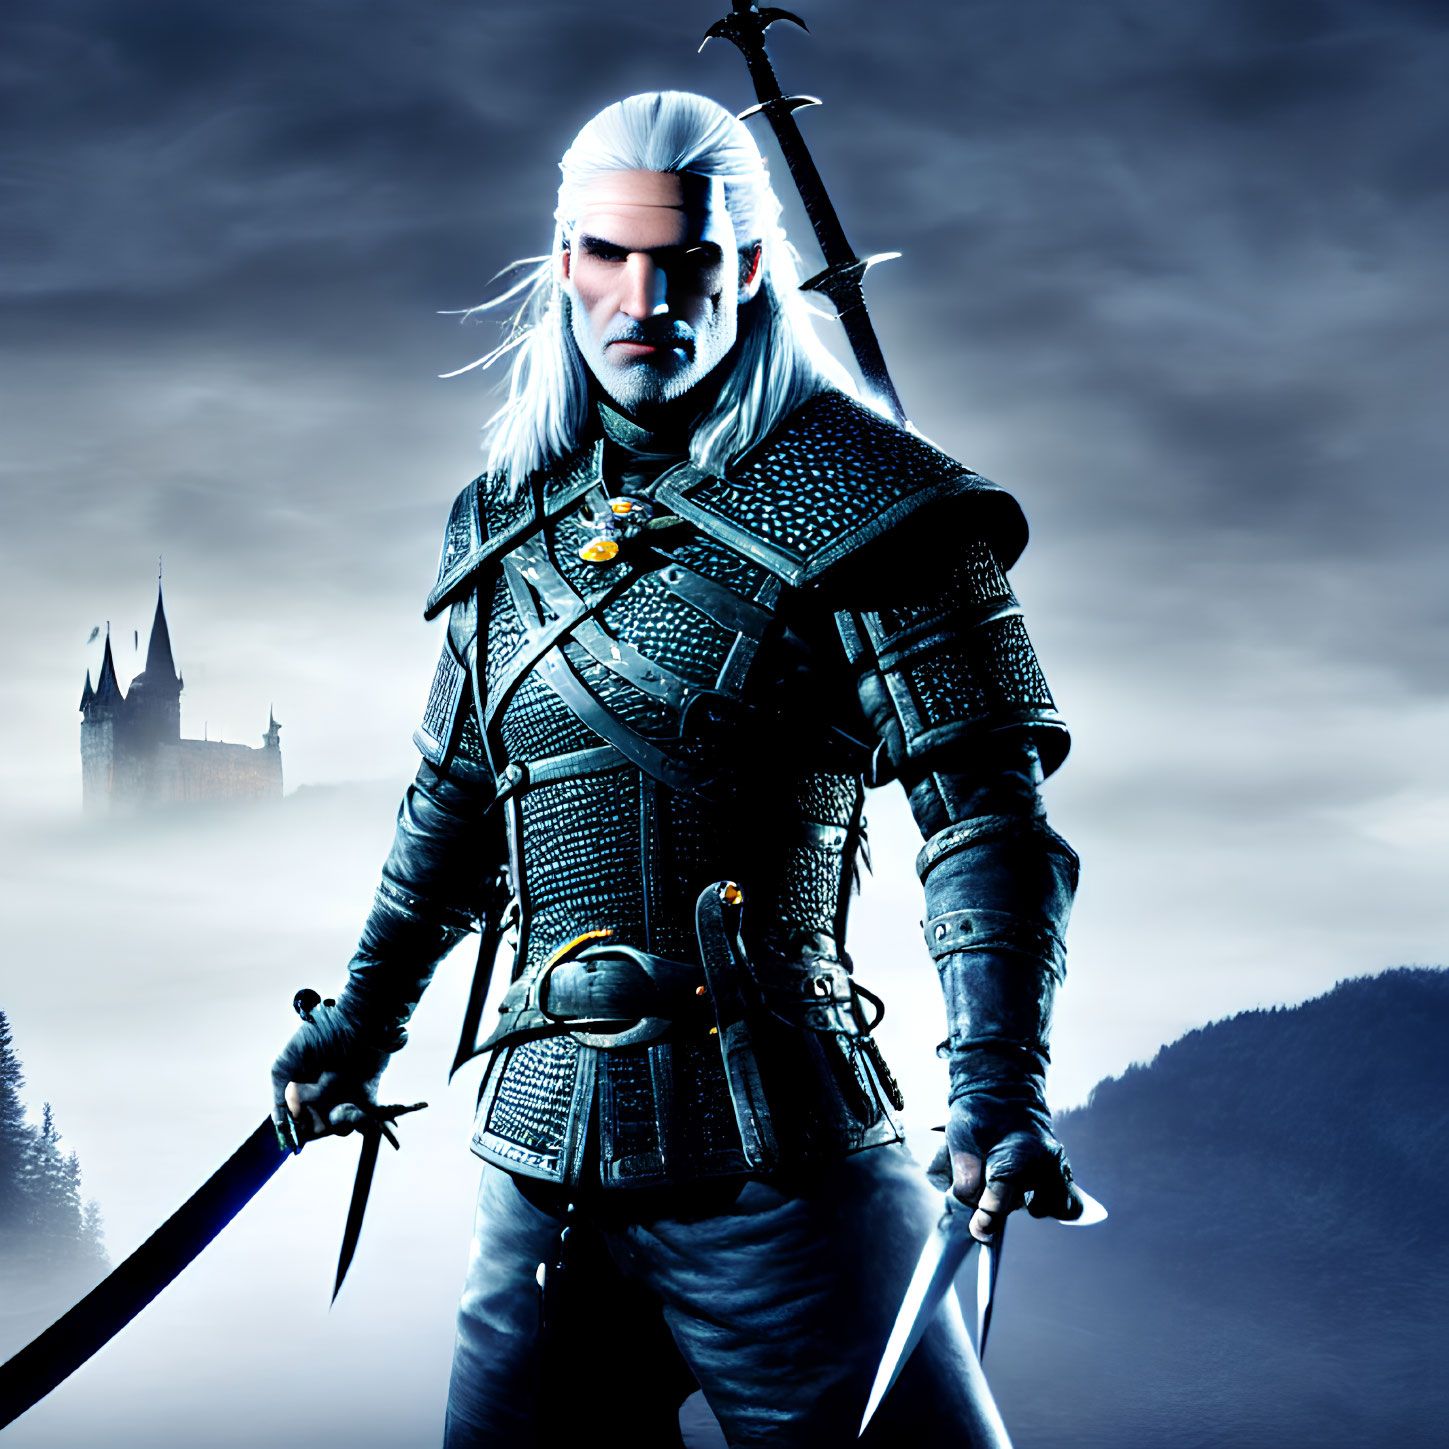 White-Haired Warrior in Studded Leather Armor with Two Swords by Misty Castle